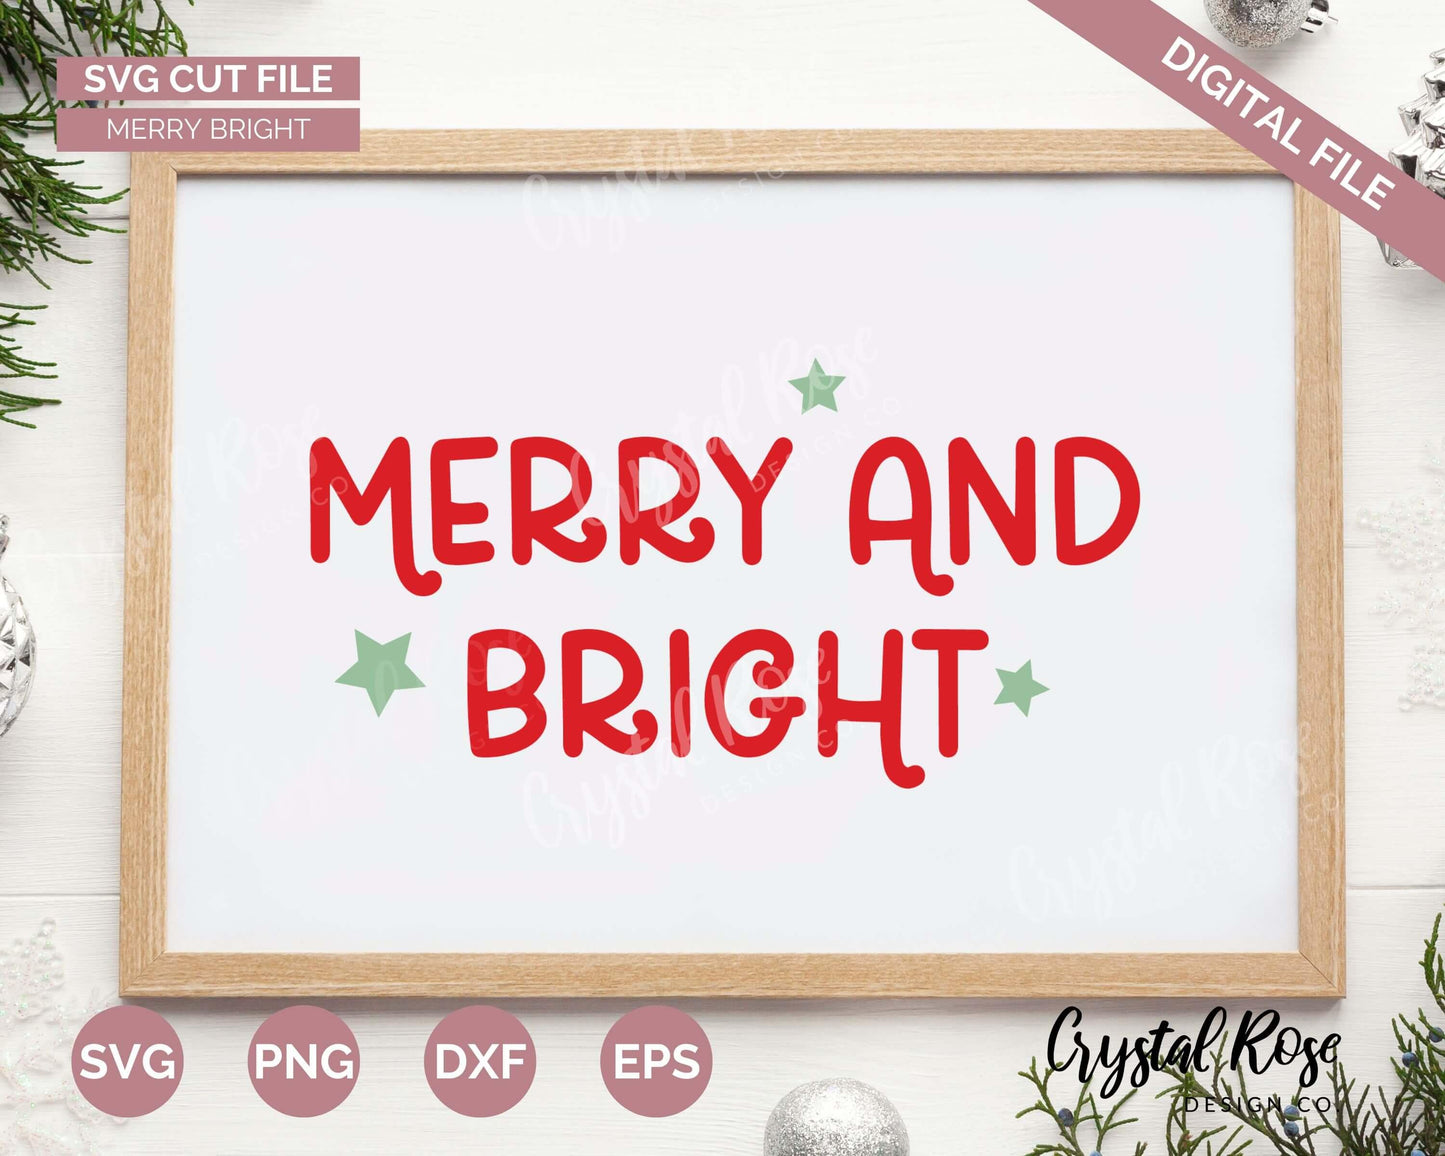 Merry and Bright Christmas SVG, Cricut, Silhouette, Glowforge (includes svg/png/dxf/eps) - Crystal Rose Design Co.